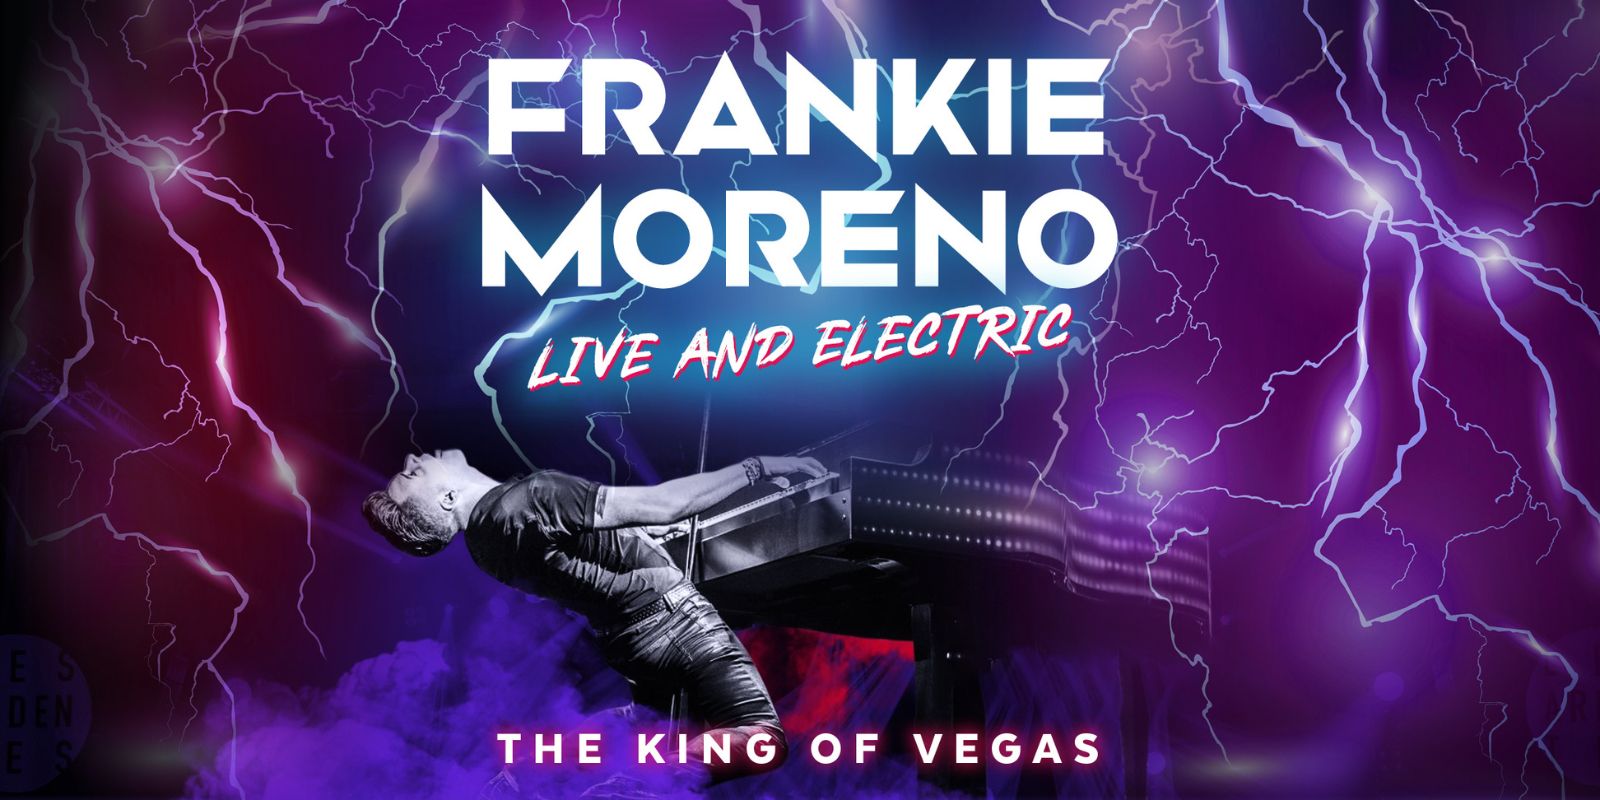 Frankie Moreno creative showing him playing piano with electric vibes throughout.